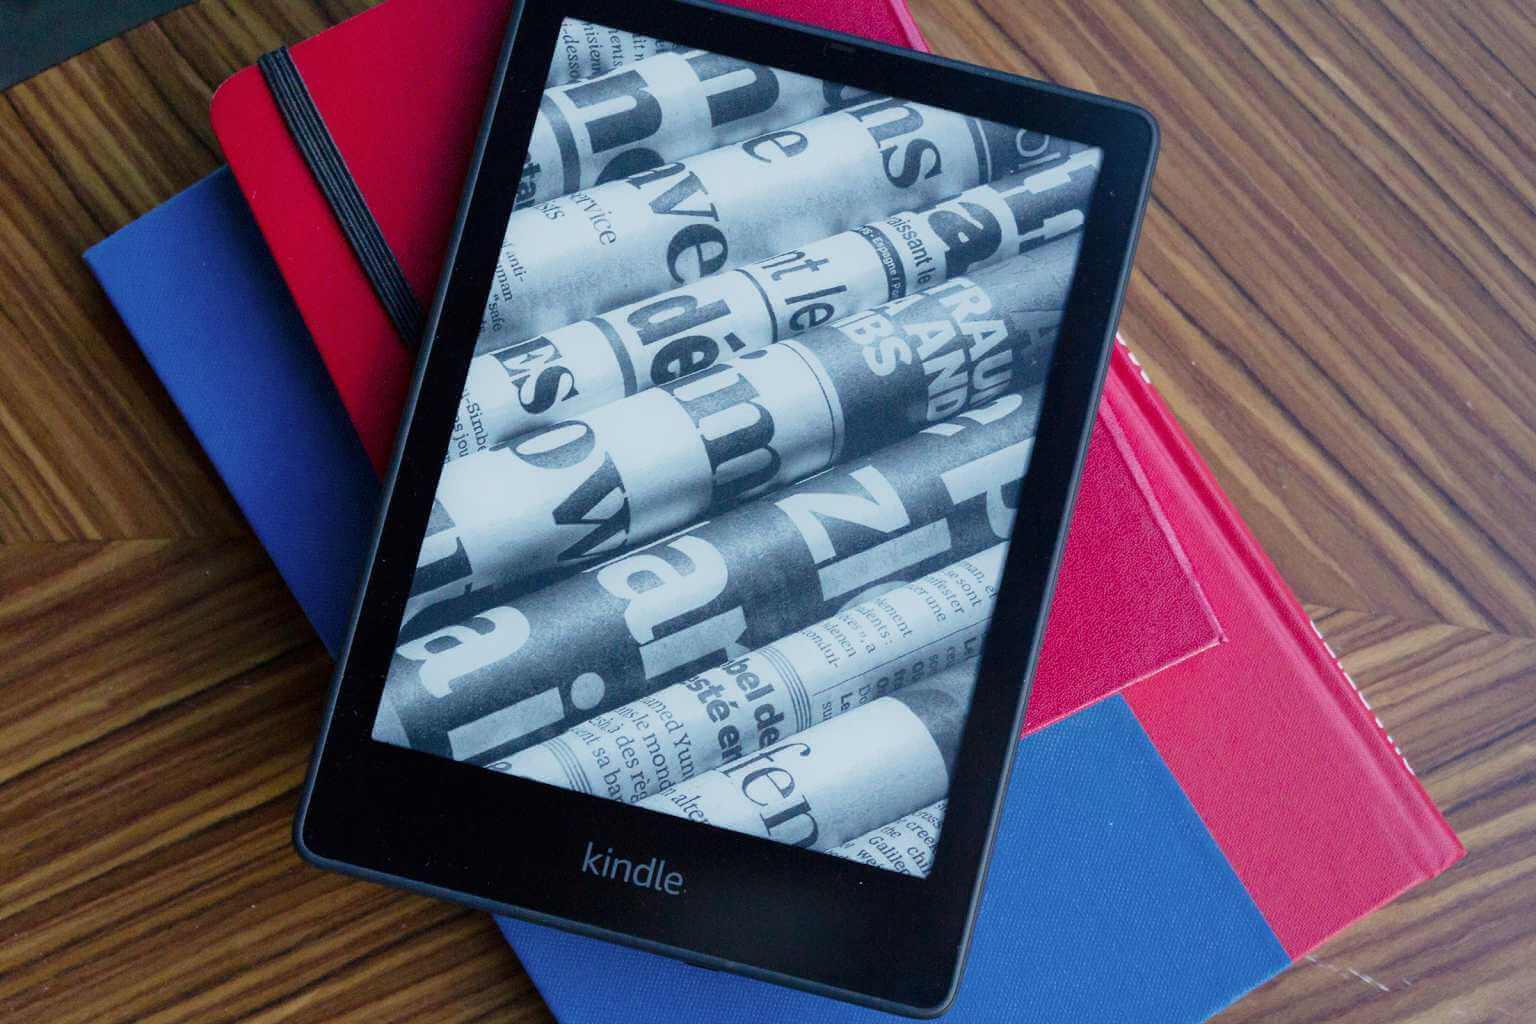 Kindle Paperwhite Refreshed with Improved Screen, Software Features  - ABC News